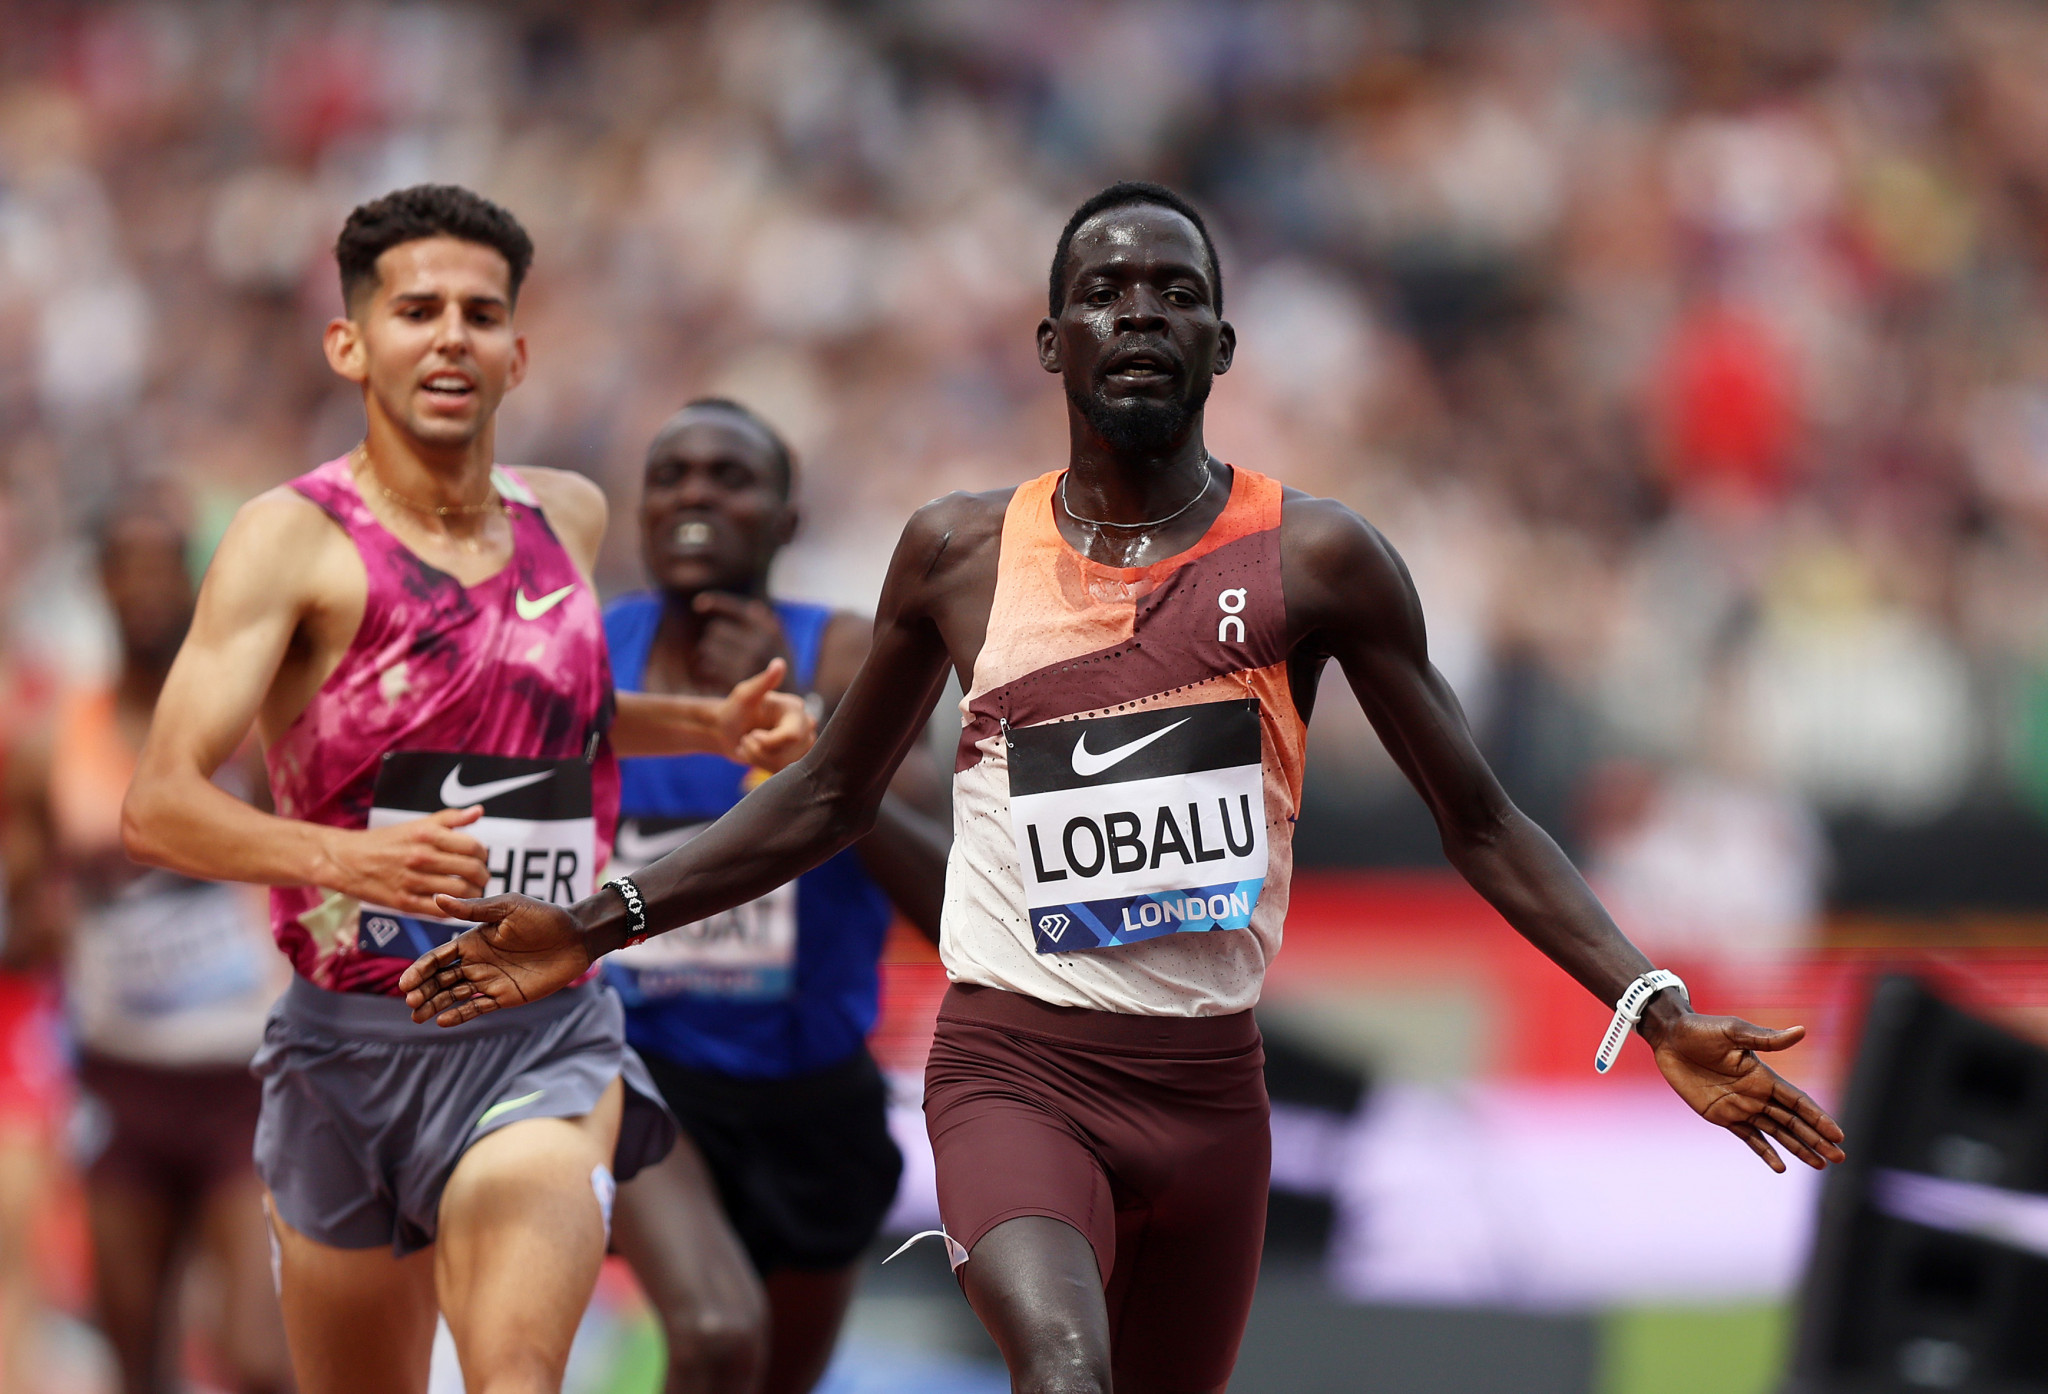 Dominic Lobalu is using inspiration from Mo Farah to help his secure an Olympic medal. GETTY IMAGES
